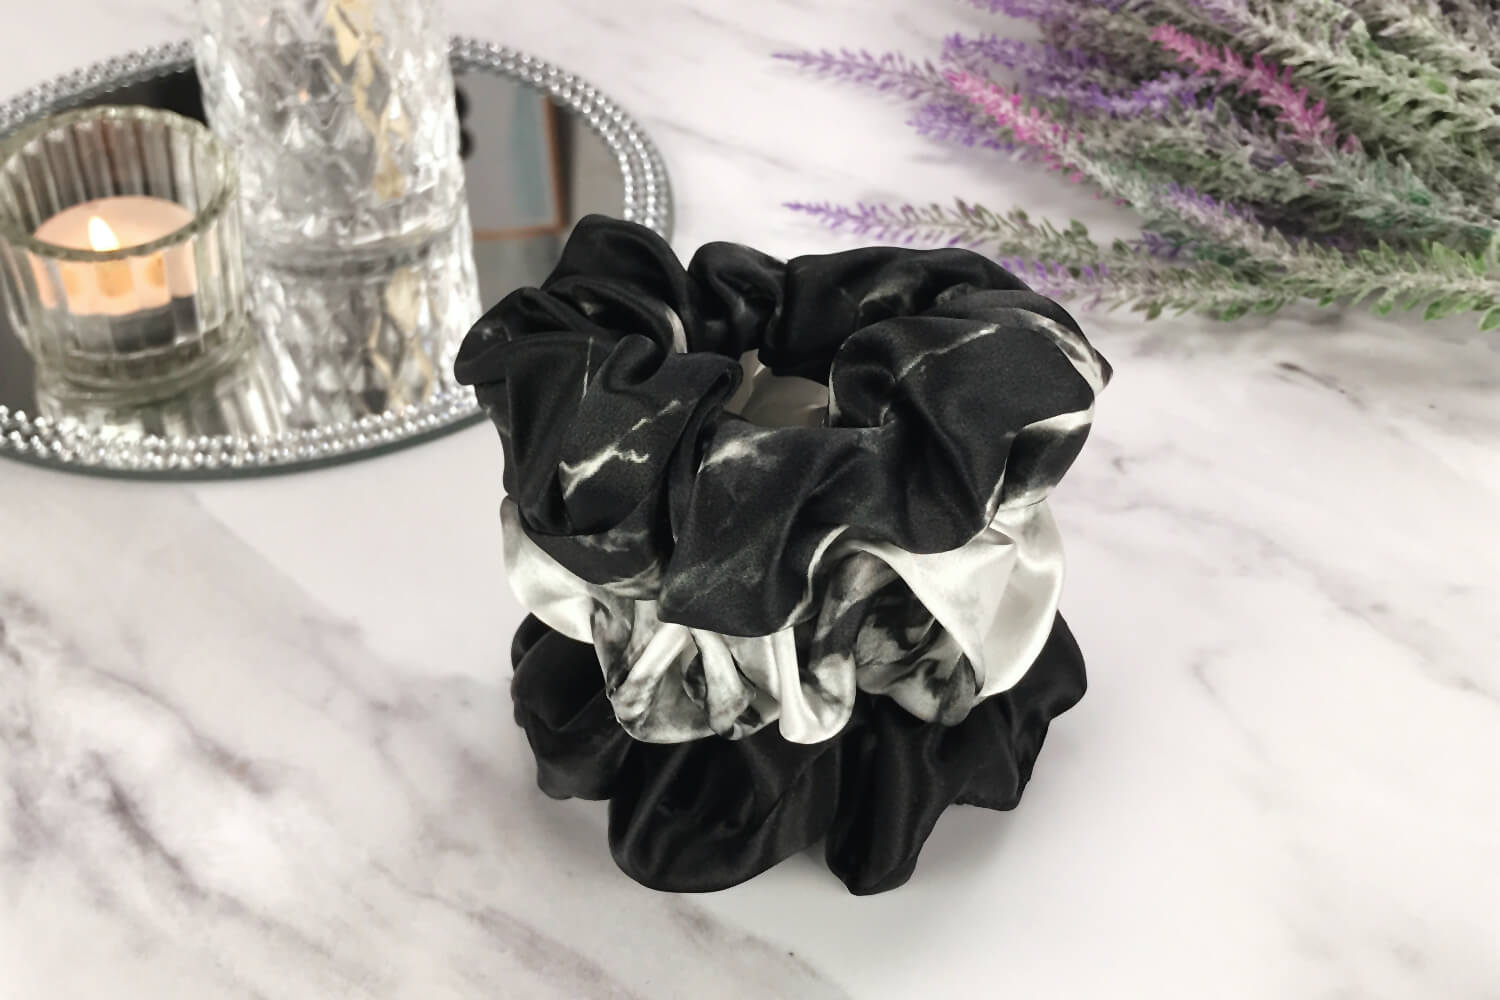 Celestial Silk large marble silk scrunchies stacked on marble counter with lavender plant and a candle in the background